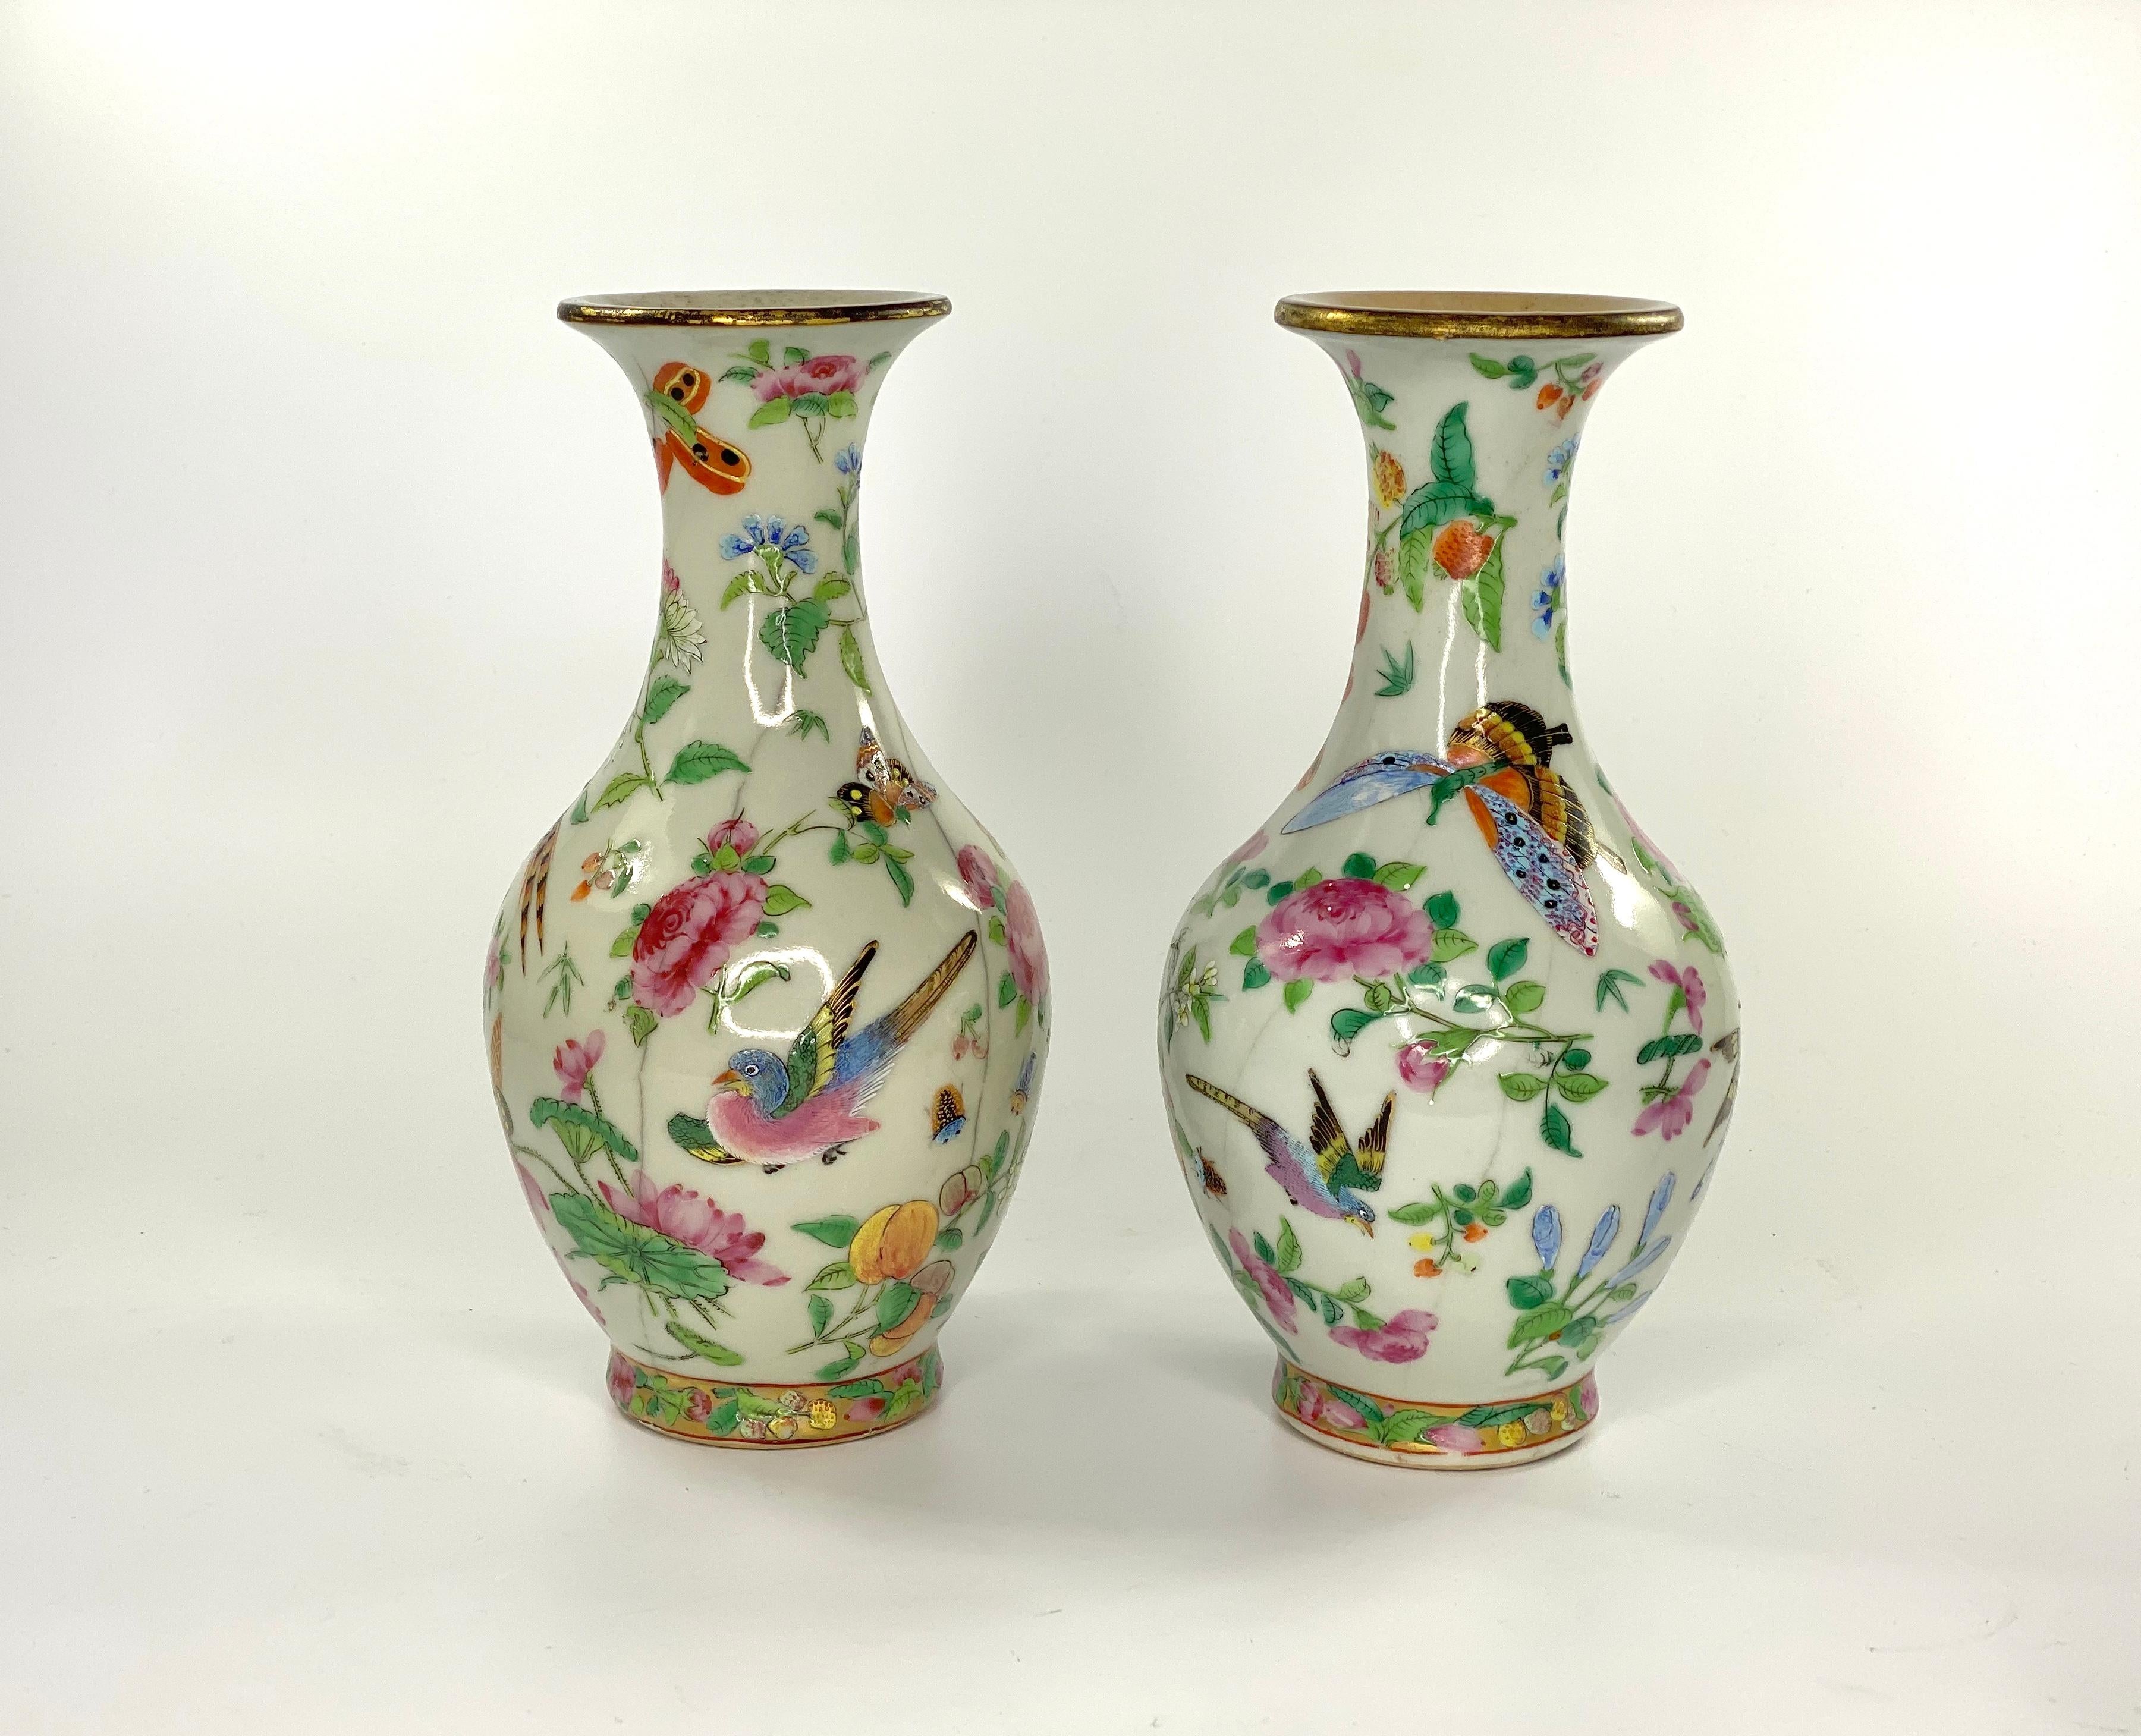 Fired Chinese Crackle Glaze Vases, Famille Rose Decoration, circa 1880